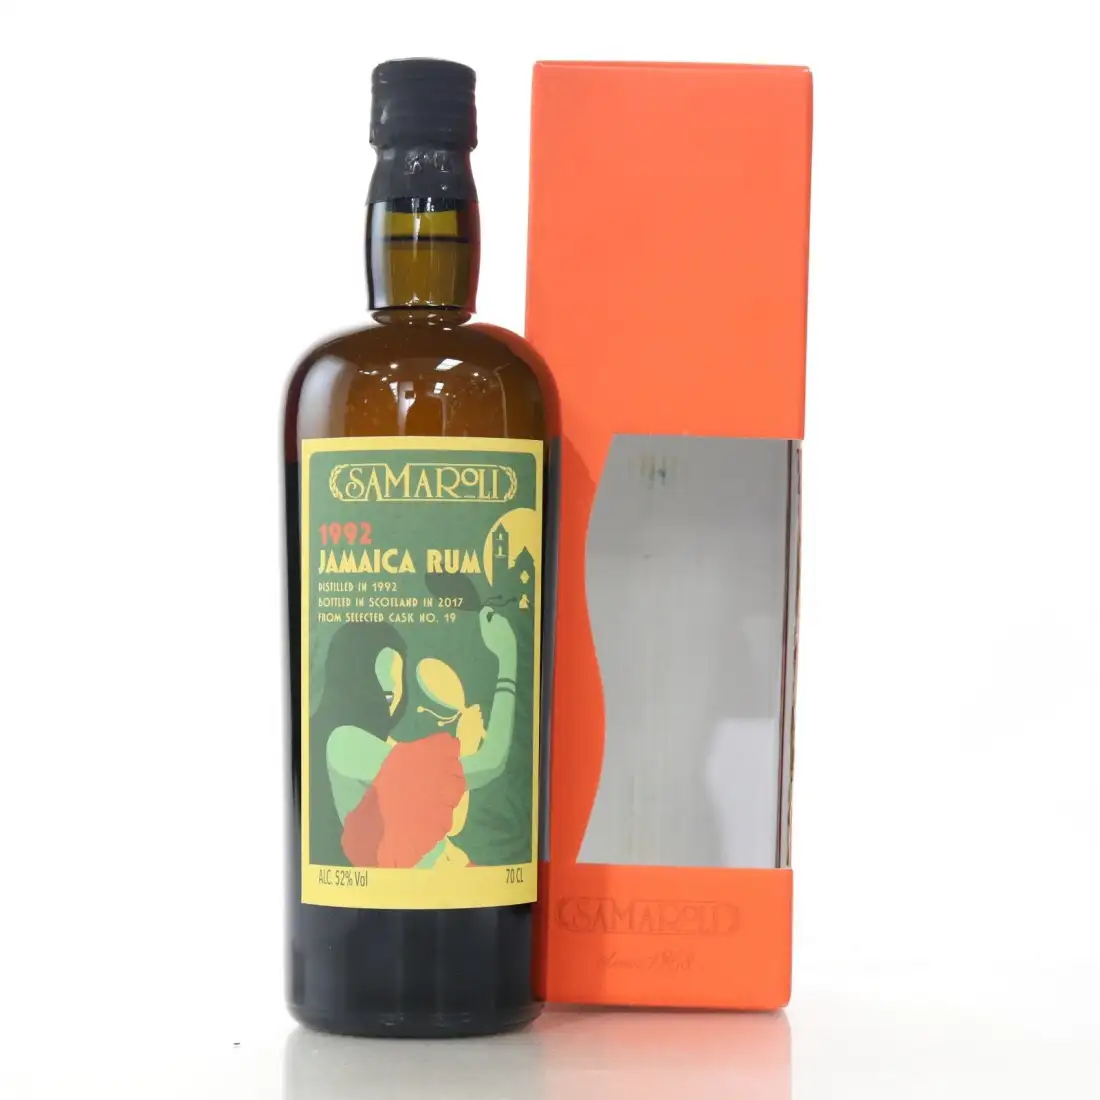 Image of the front of the bottle of the rum Jamaica Single Cask HLCF